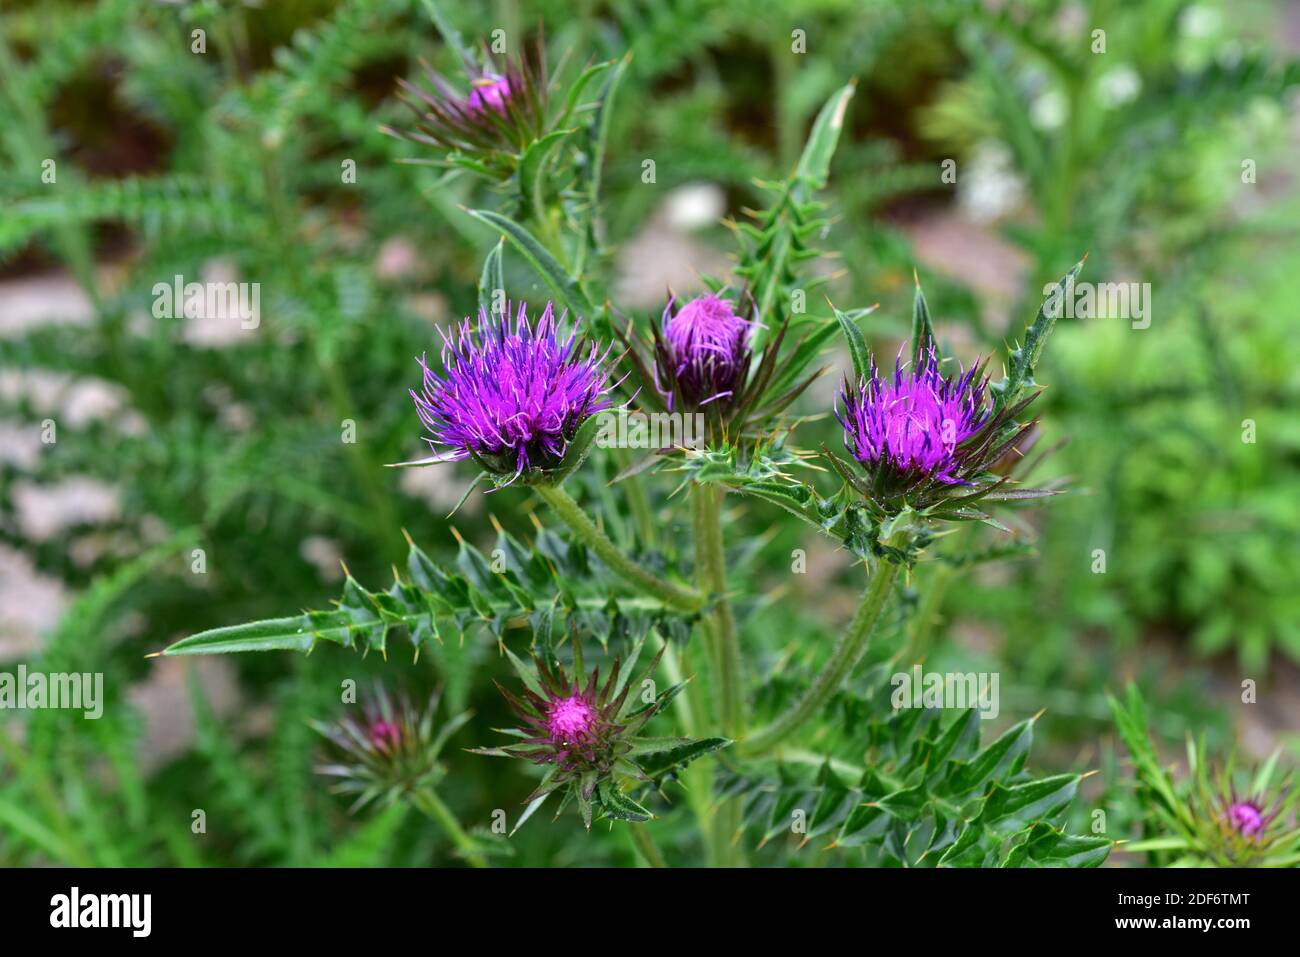 Japanese thistle (Cirsium japonicum or Carduus japonicum) is a perennial or biennial herb native to eastern Asia. Chapters detail. Stock Photo